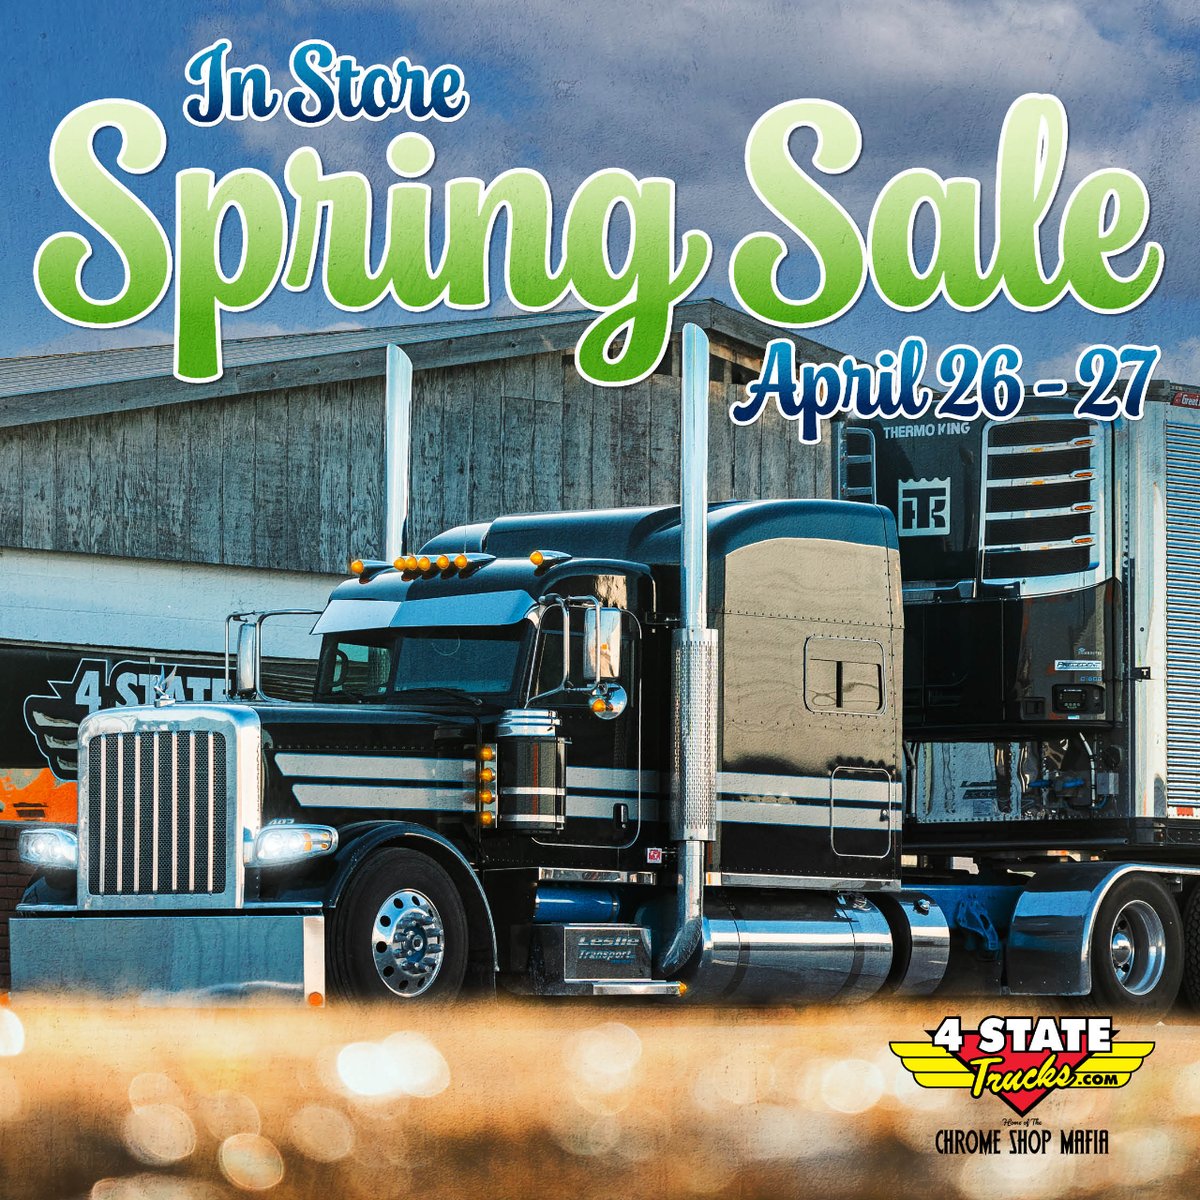 Mark your calendars, folks! Join us for a 2-Day In-Store Only Spring Sale at 4 State Trucks April 26th & 27th.
More info to come later. 👀

#4StateTrucks #ChromeShopMafia #chrome #chromeshop #semitrucks #trucking #bigrig #tractortrailer #cdldriver #truckers #diesel